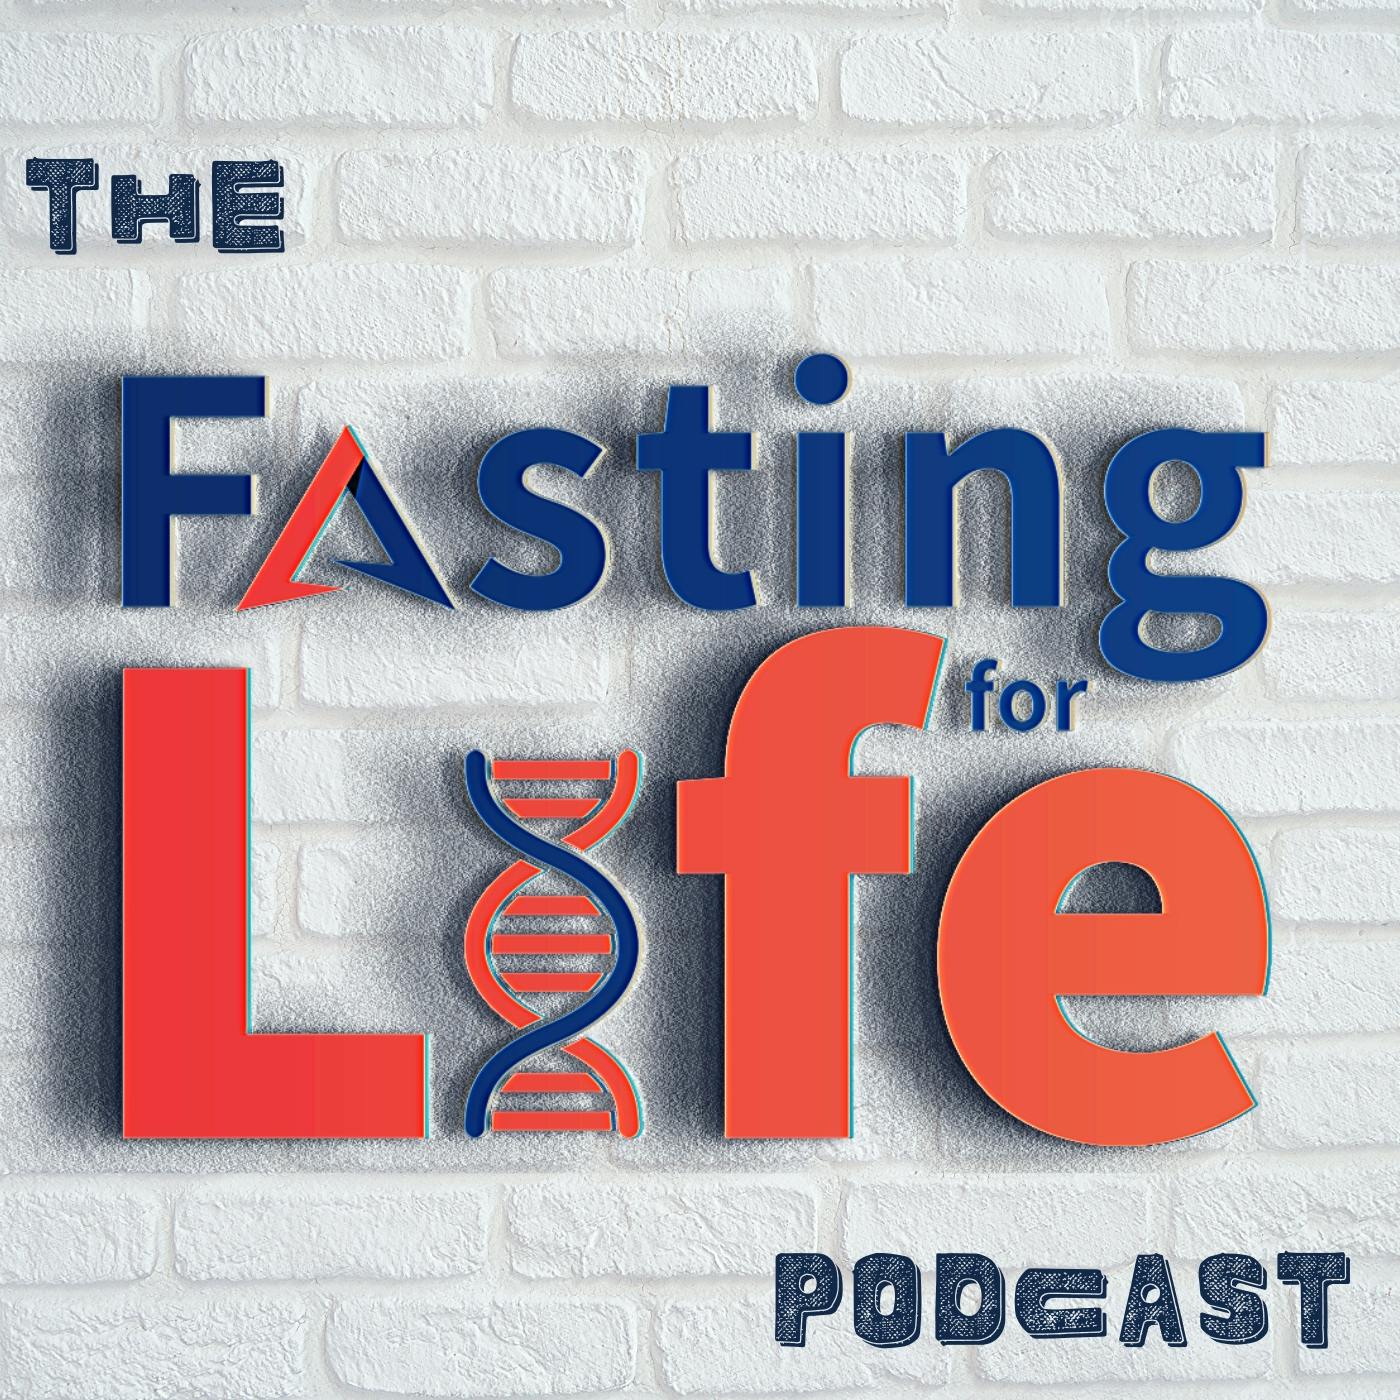 Ep. 103 - Should I fast before surgery? | Does fasting help wound healing & diabetic ulcers? | Taking antibiotics or pain meds while fasting | Fasting effects on burns, angiogenesis, stem cells, & mTO